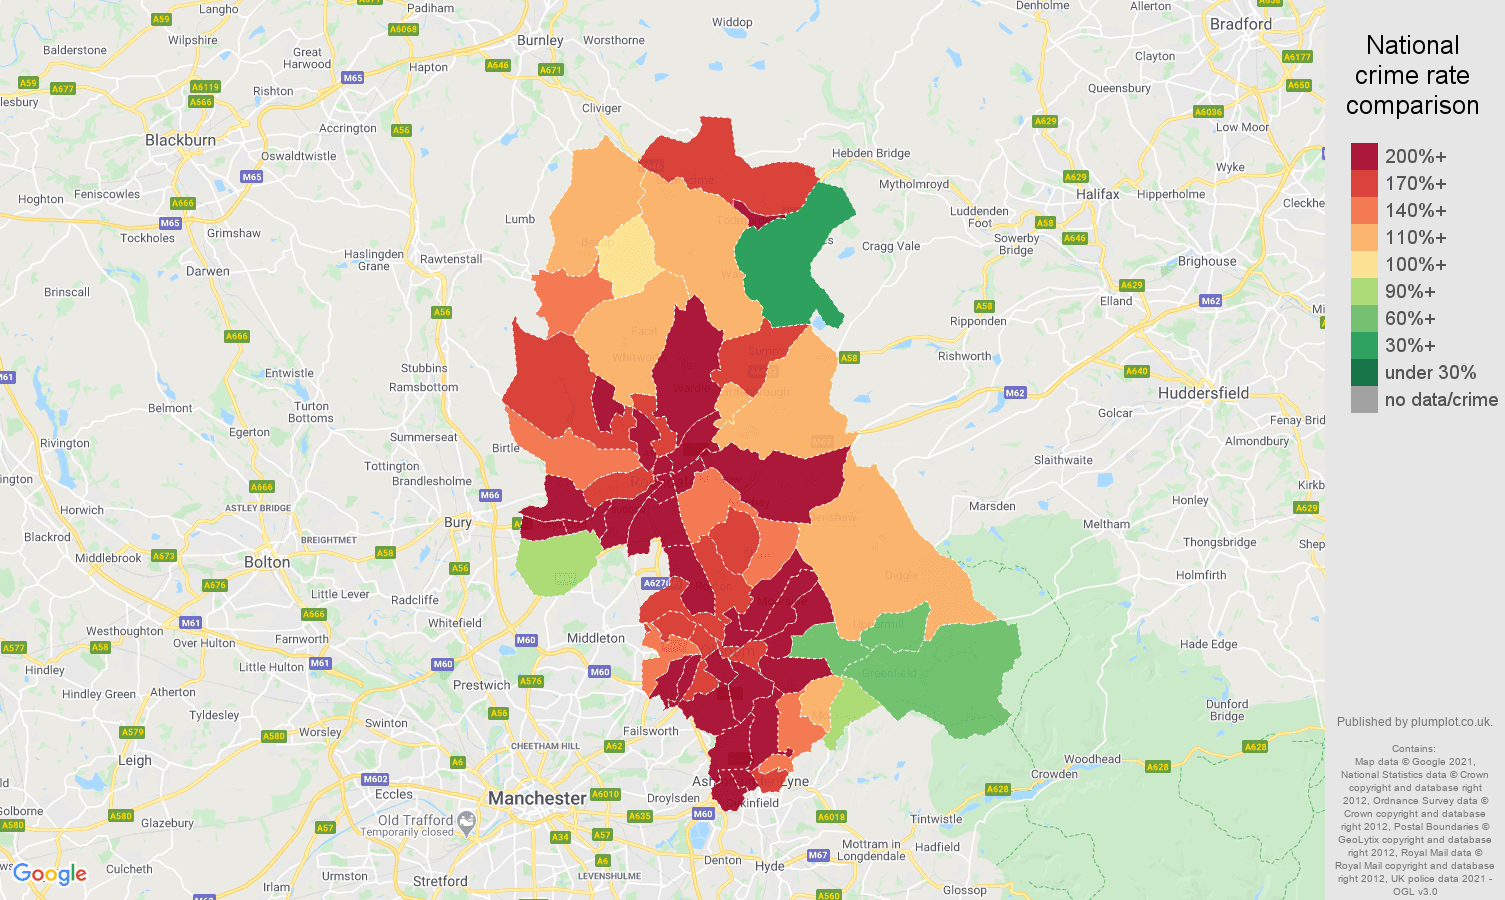 Oldham other crime rate comparison map